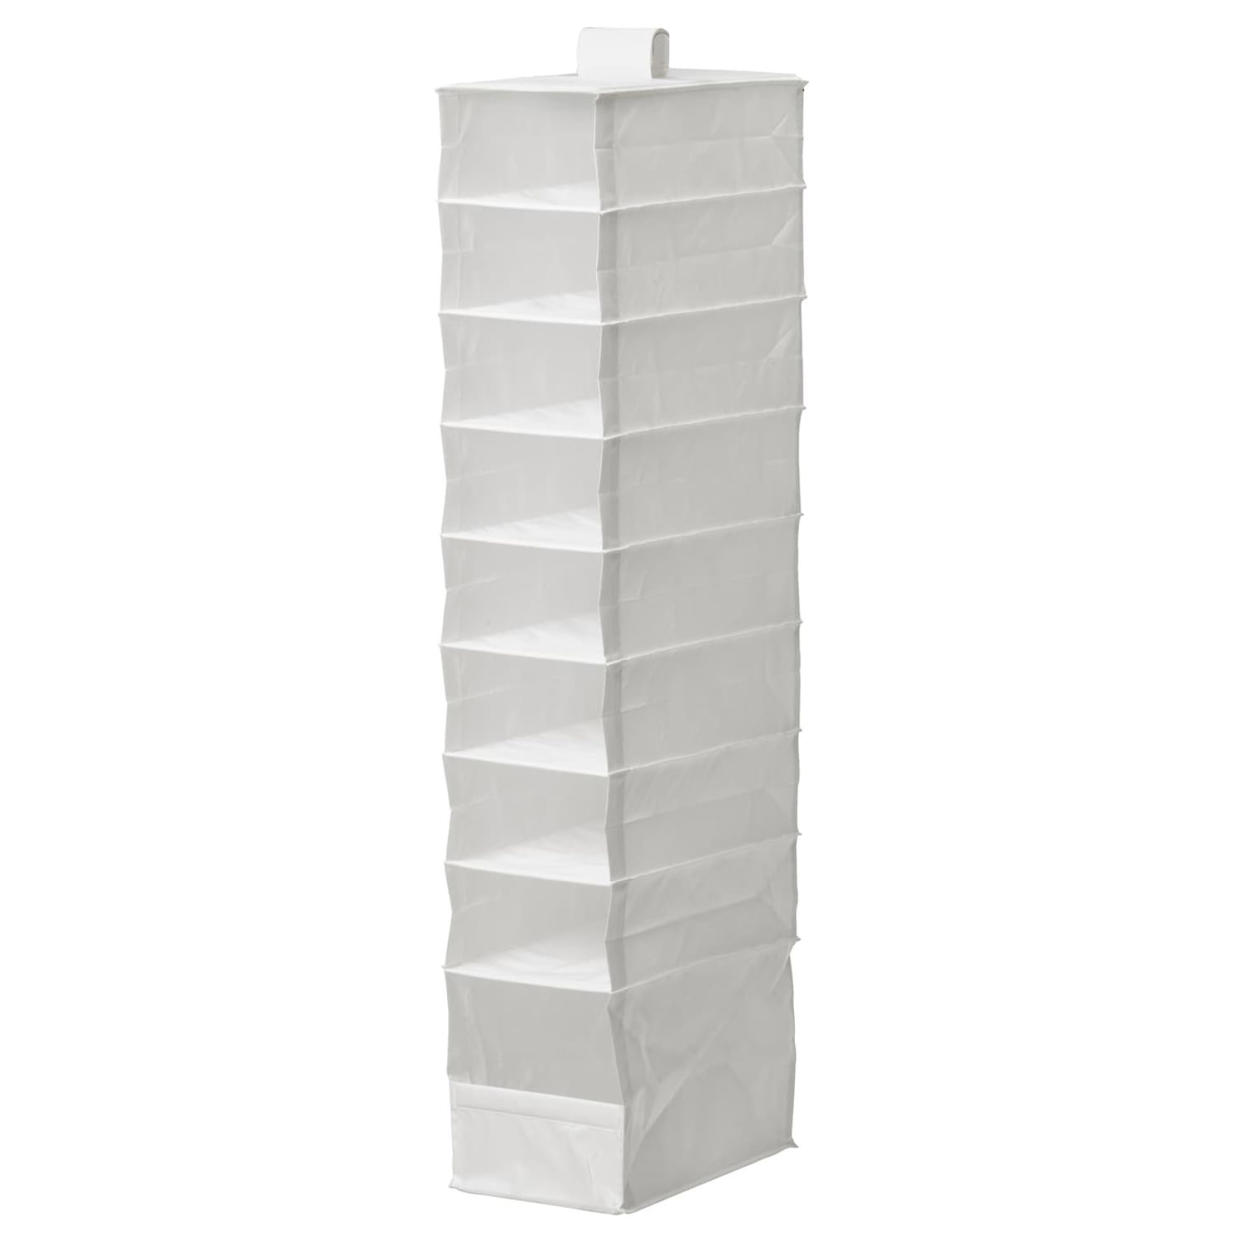 SKUBB Organizer with 9 compartments - white 8 ¾x13 ½x47 ¼ 